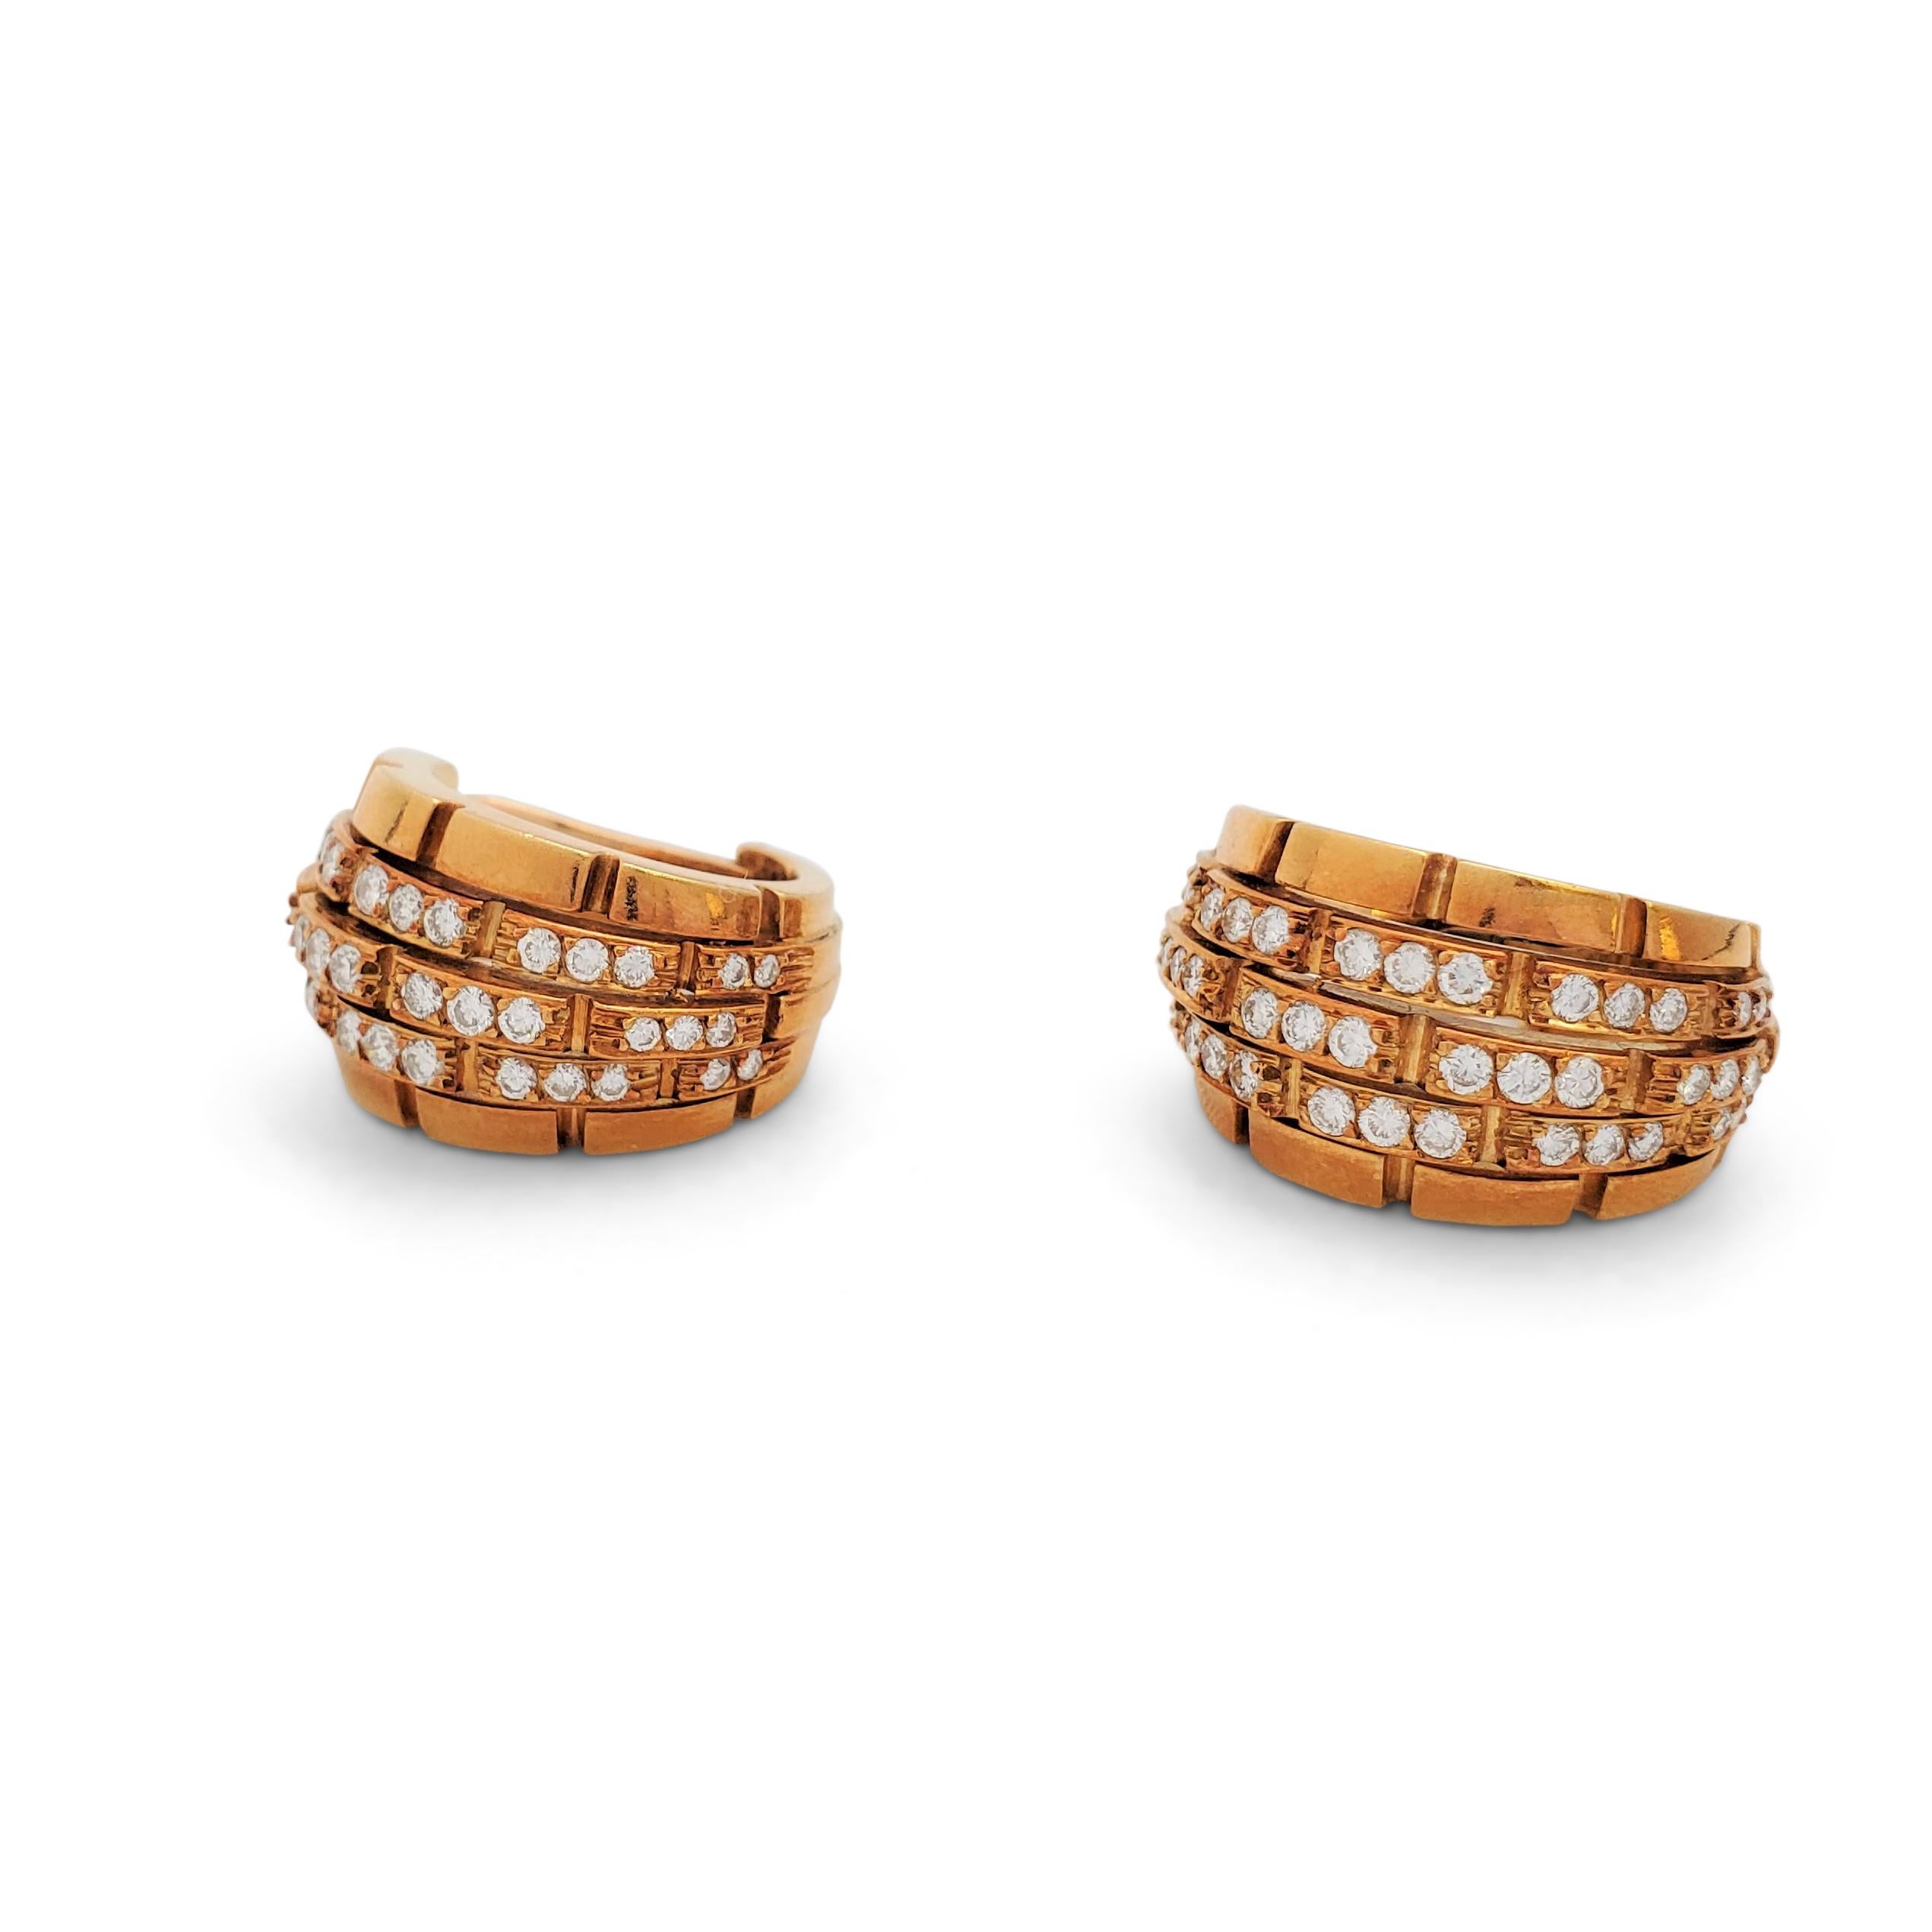 Authentic vintage Cartier 'Maillon Panthere' clip earrings crafted in 18 karat yellow gold are comprised of five incurved links set with round brilliant cut diamonds totaling an estimated 2.15 carats (E-F, VS). The earrings boast a beautiful patina